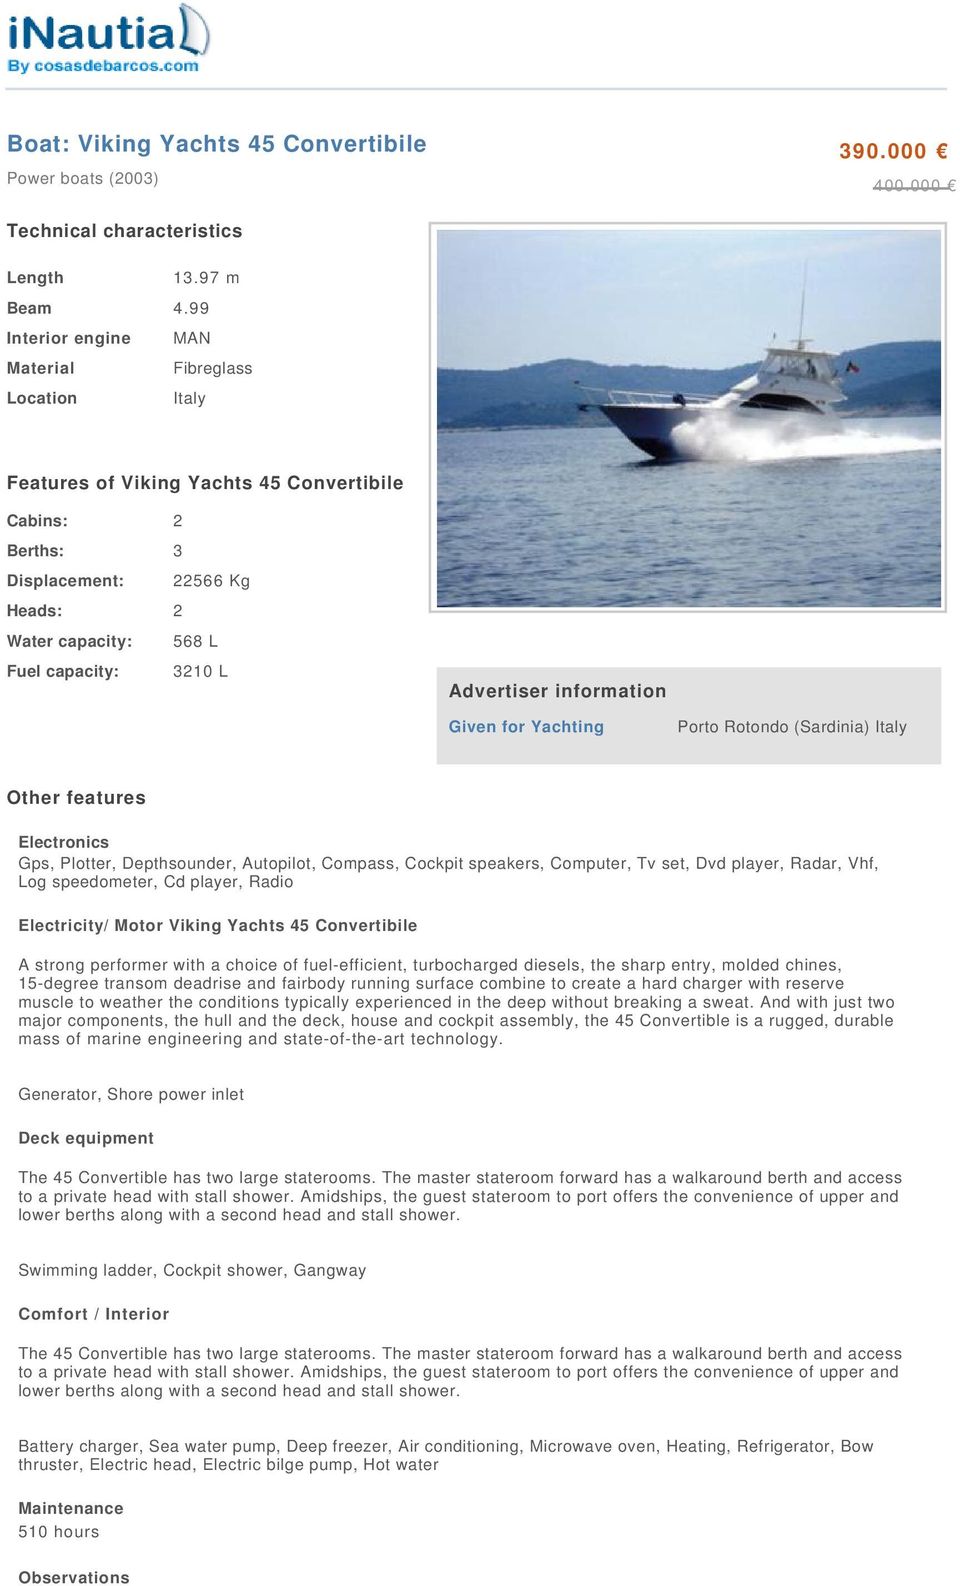 Advertiser information Given for Yachting Porto Rotondo (Sardinia) Italy Other features Electronics Gps, Plotter, Depthsounder, Autopilot, Compass, Cockpit speakers, Computer, Tv set, Dvd player,